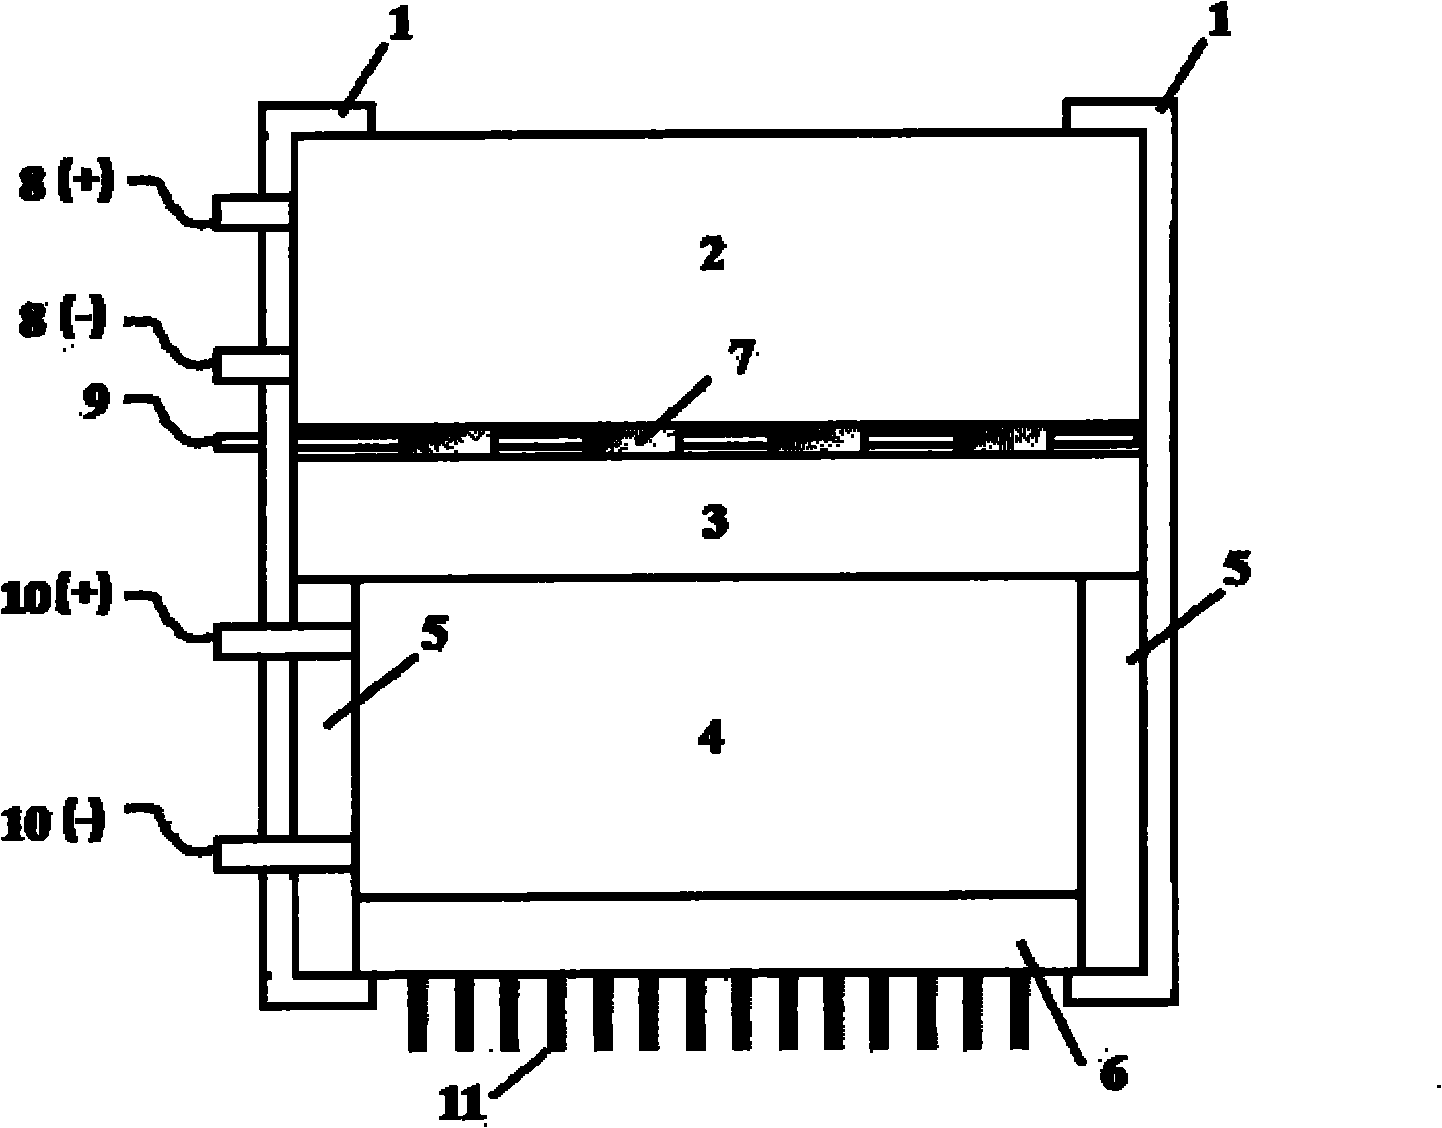 Solar photovoltaic-thermoelectric integrated device